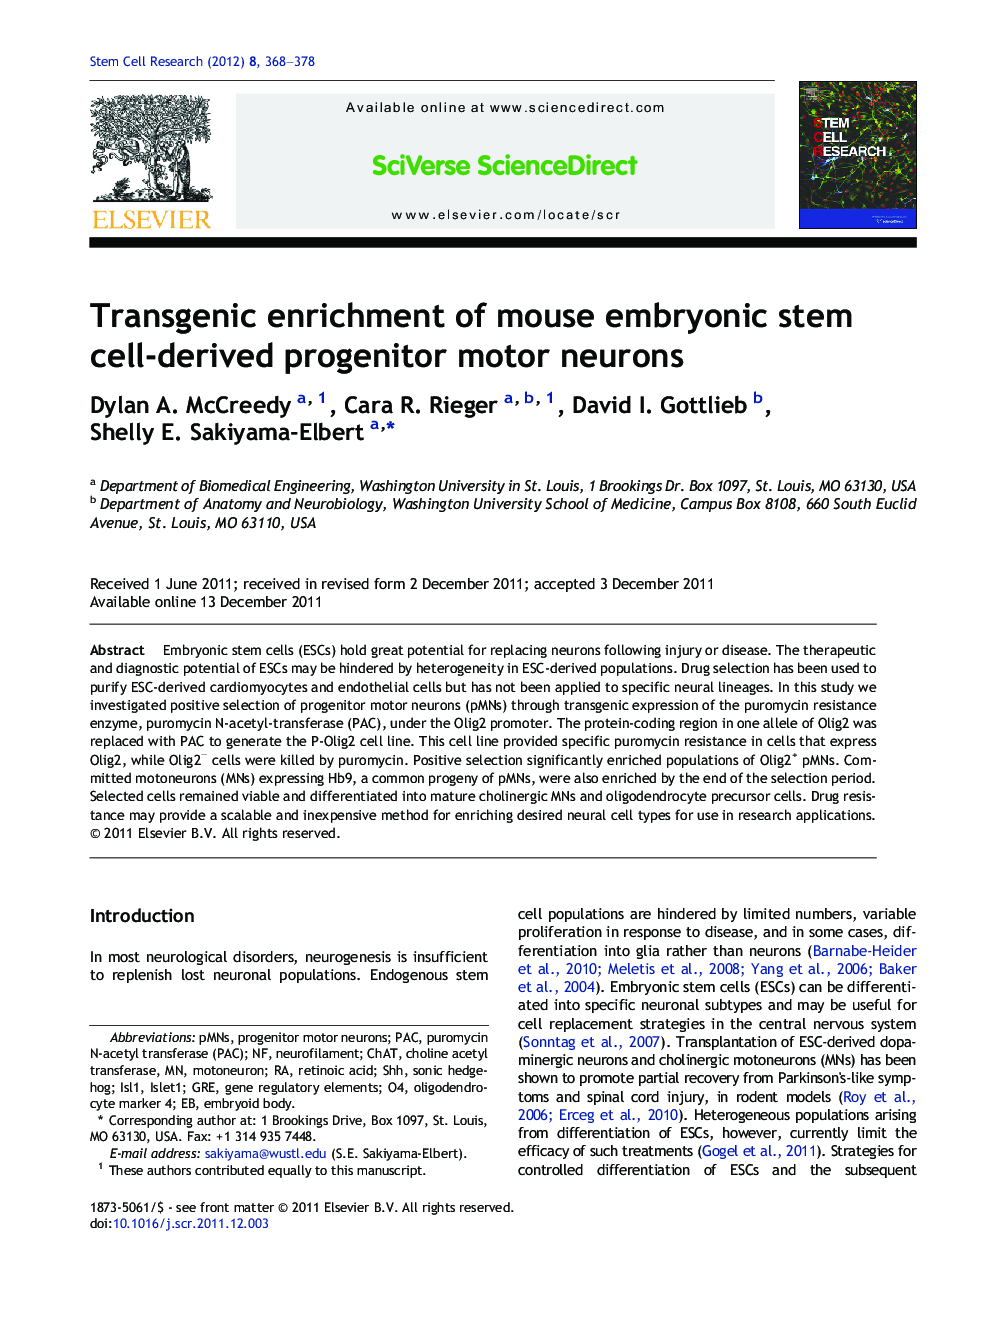 Transgenic enrichment of mouse embryonic stem cell-derived progenitor motor neurons